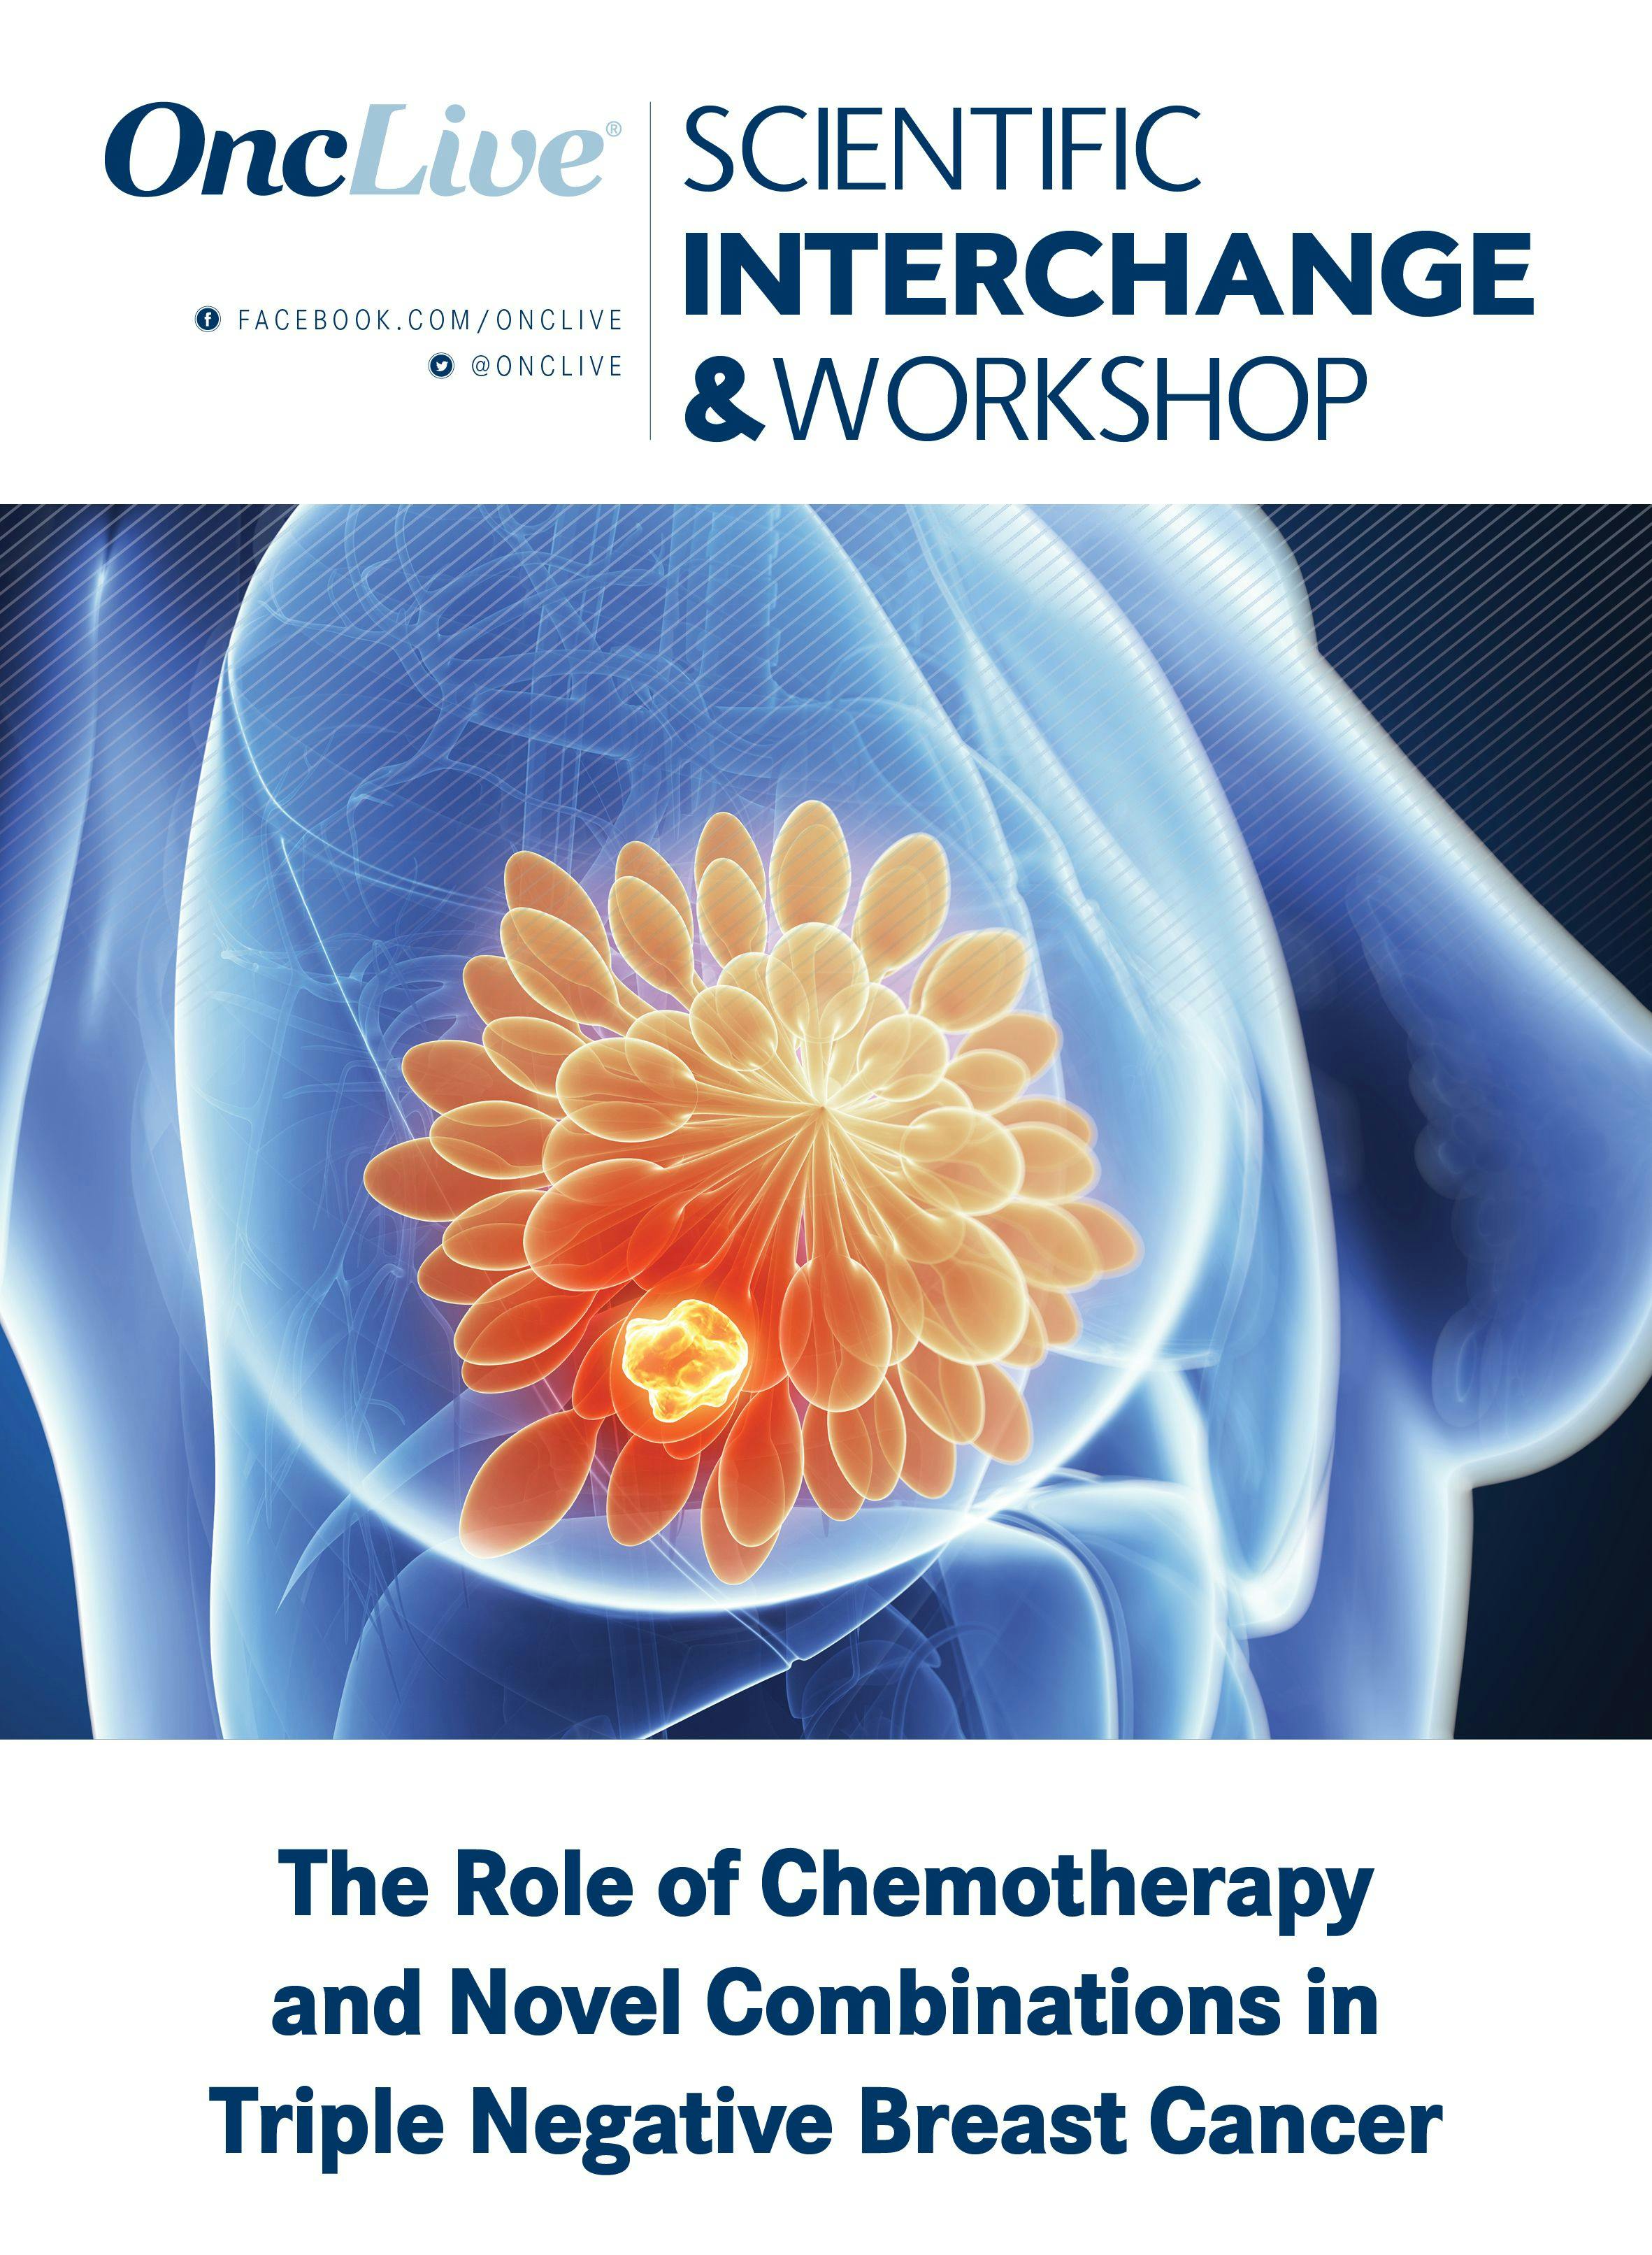 The Role of Chemotherapy and Novel Combinations in Triple Negative Breast Cancer